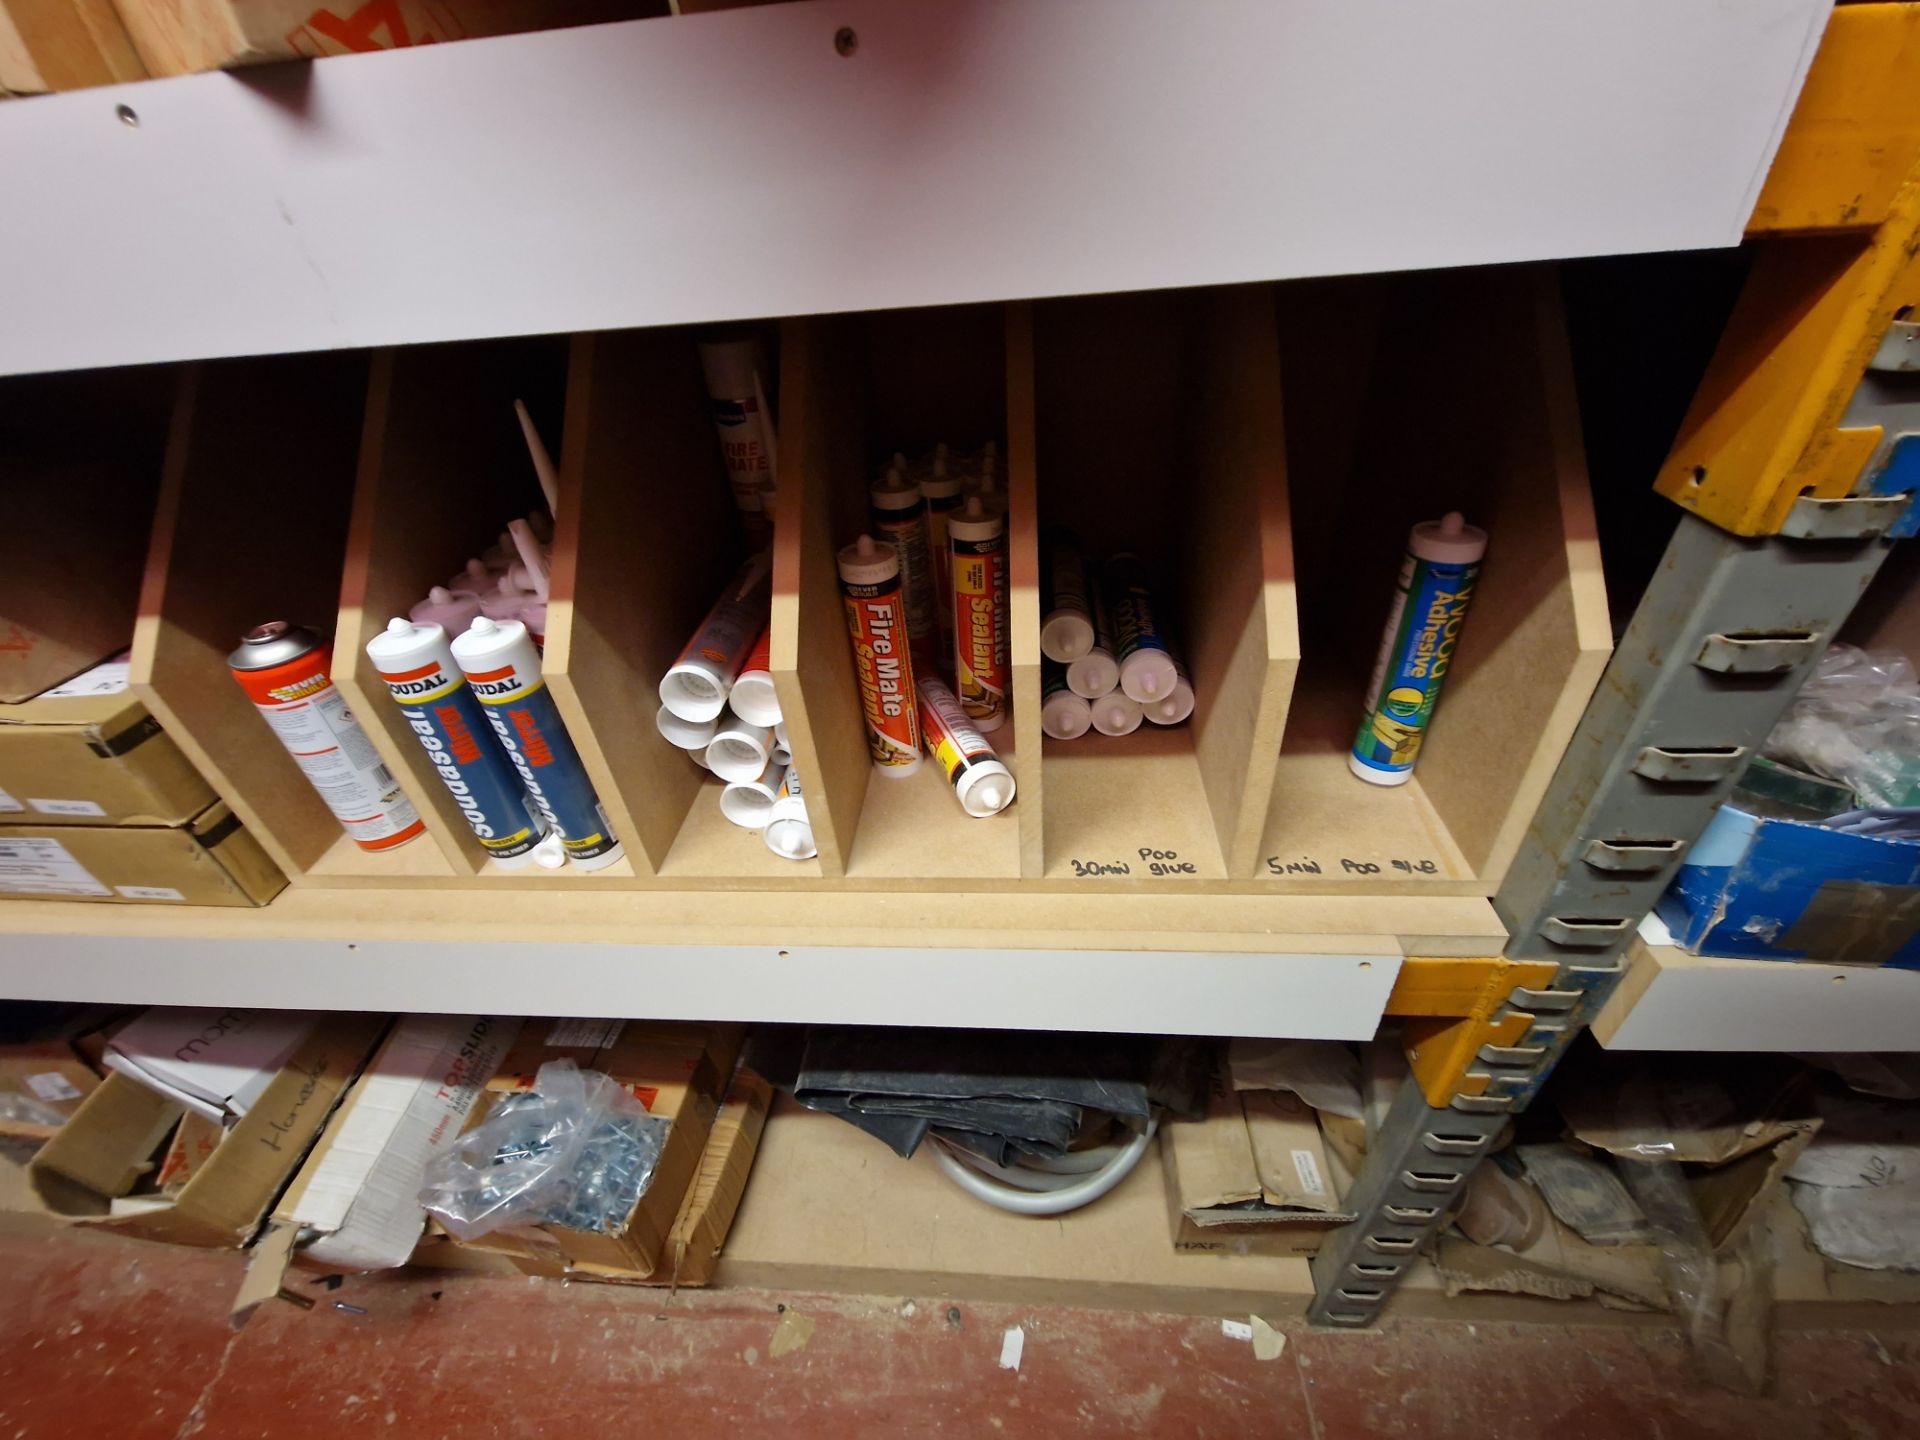 Contents to One Bay of Racking, including Fixtures, Fittings, Bolts, Drawer Runners, Bar Legs, - Image 13 of 32